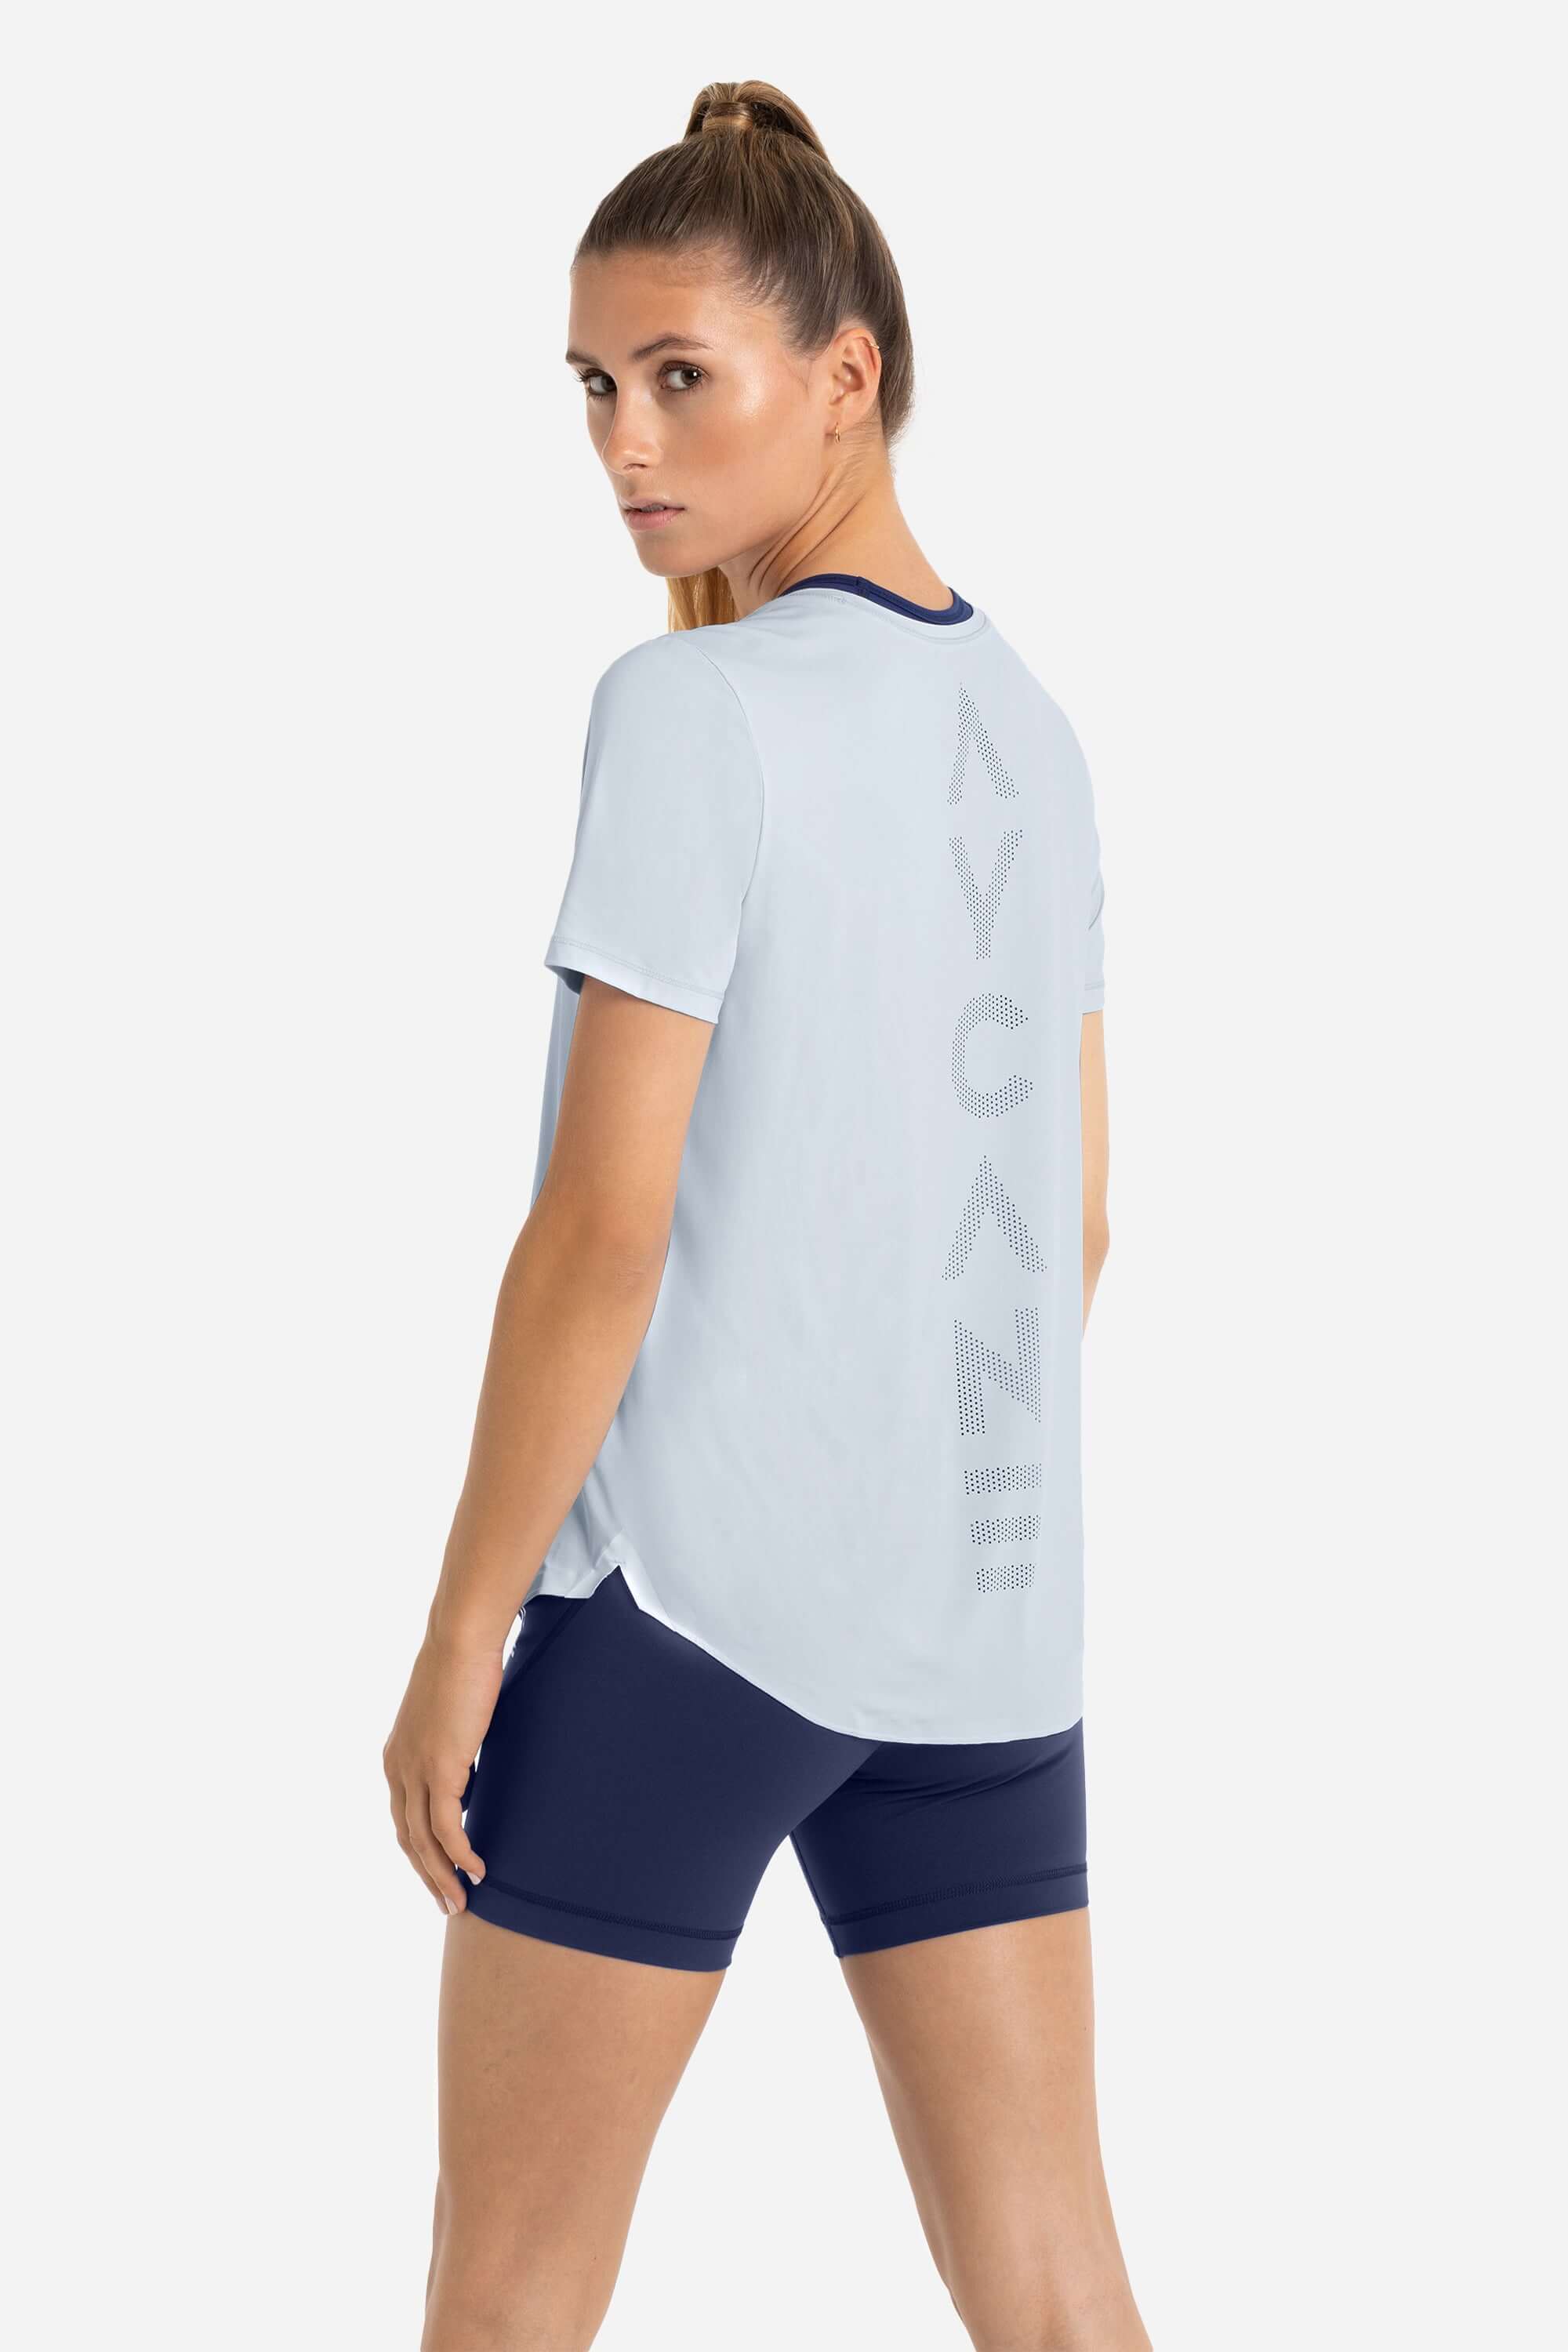 Women wearing a training t-shirt short sleeve in blue with short tights in blue from AYCANE